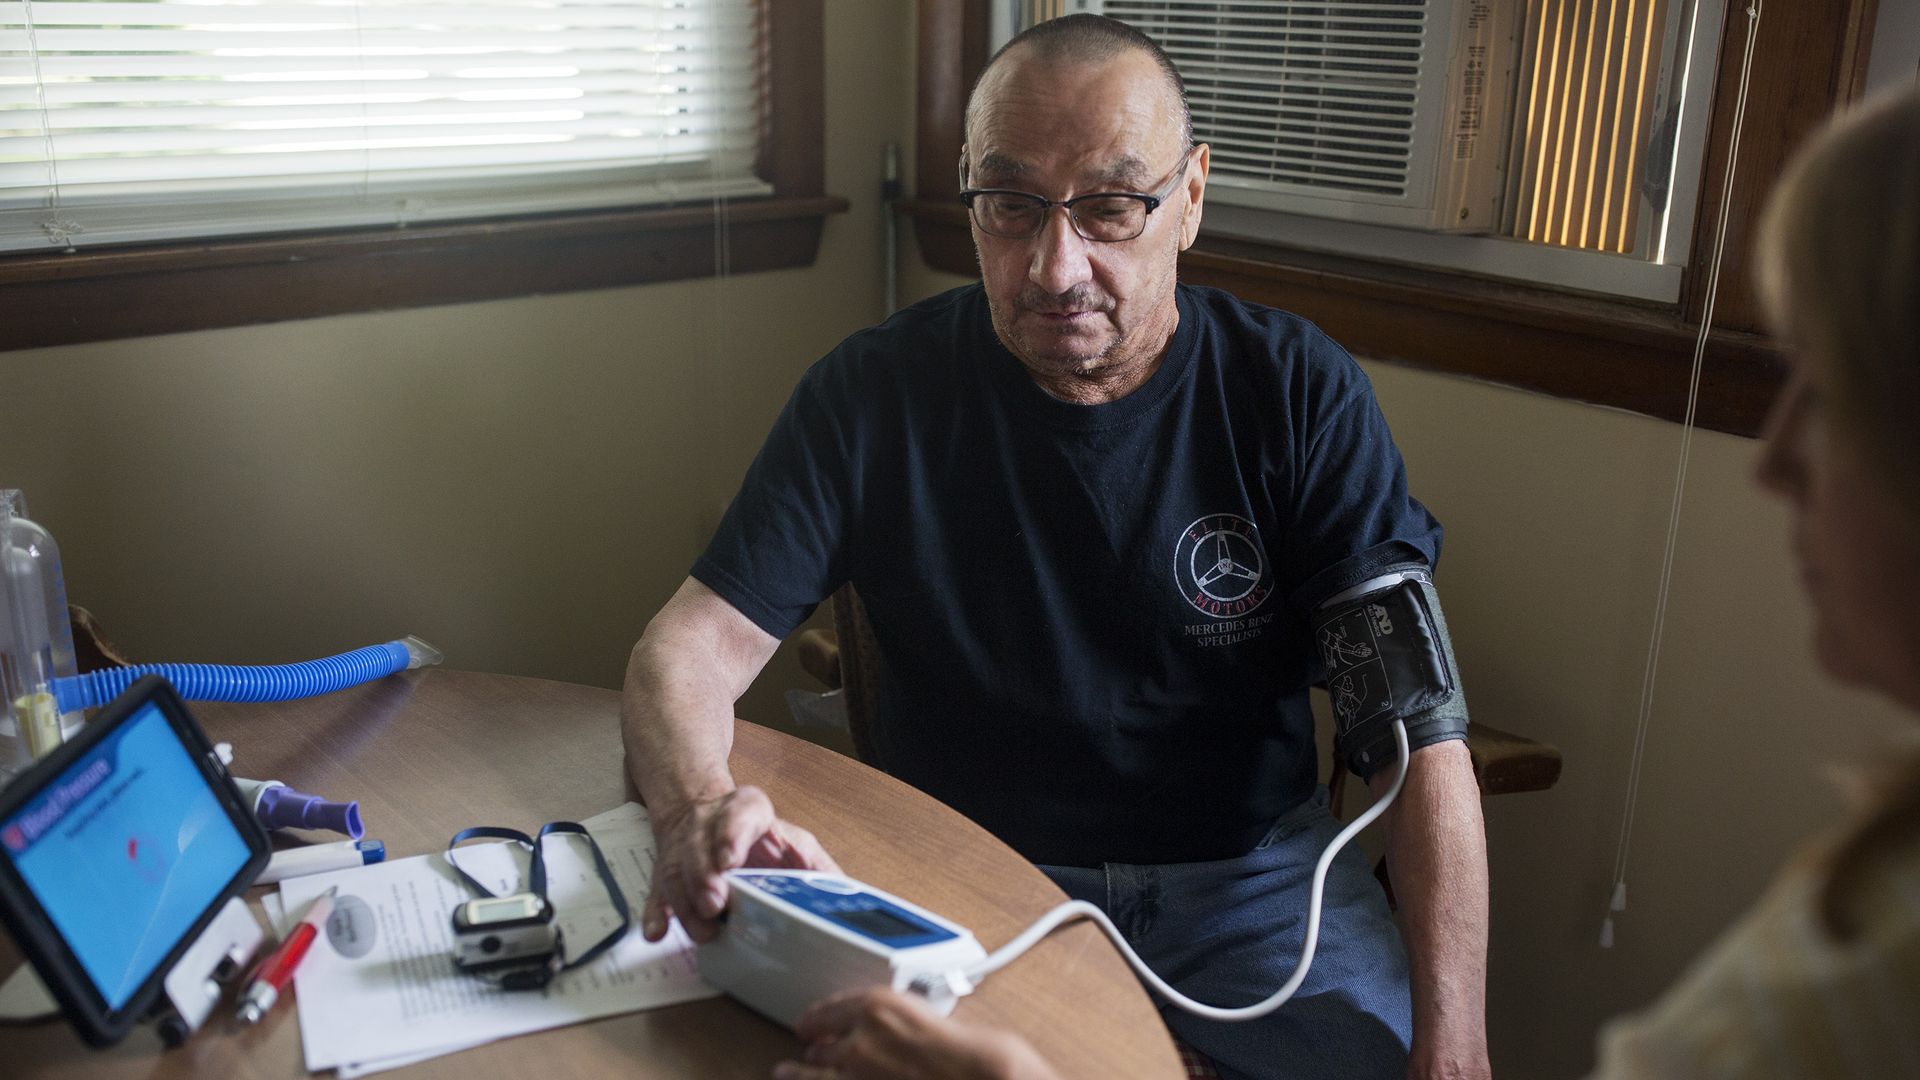 A man measures his vitals and sends the data electronically to nurses.